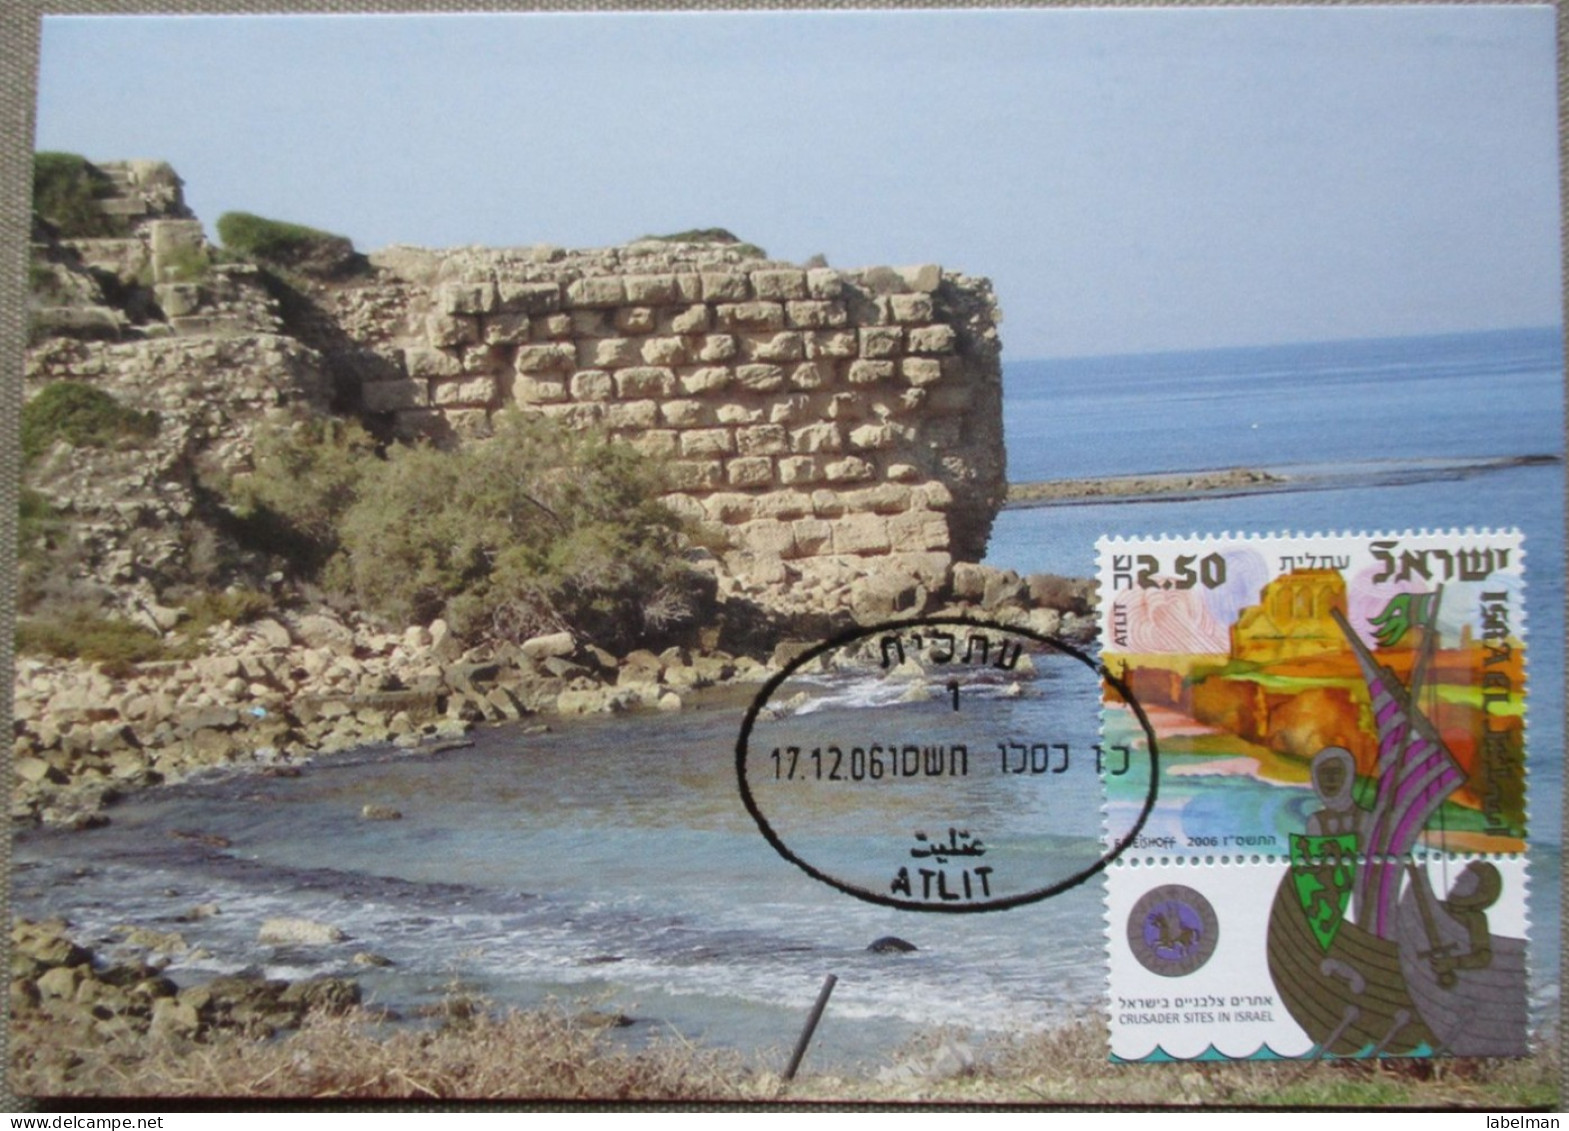 ISRAEL 2006 MAXIMUM CARD POSTCARD ATLIT FORTRESS FIRST DAY OF ISSUE CARTOLINA CARTE POSTALE POSTKARTE CARTOLINA - Cartes-maximum